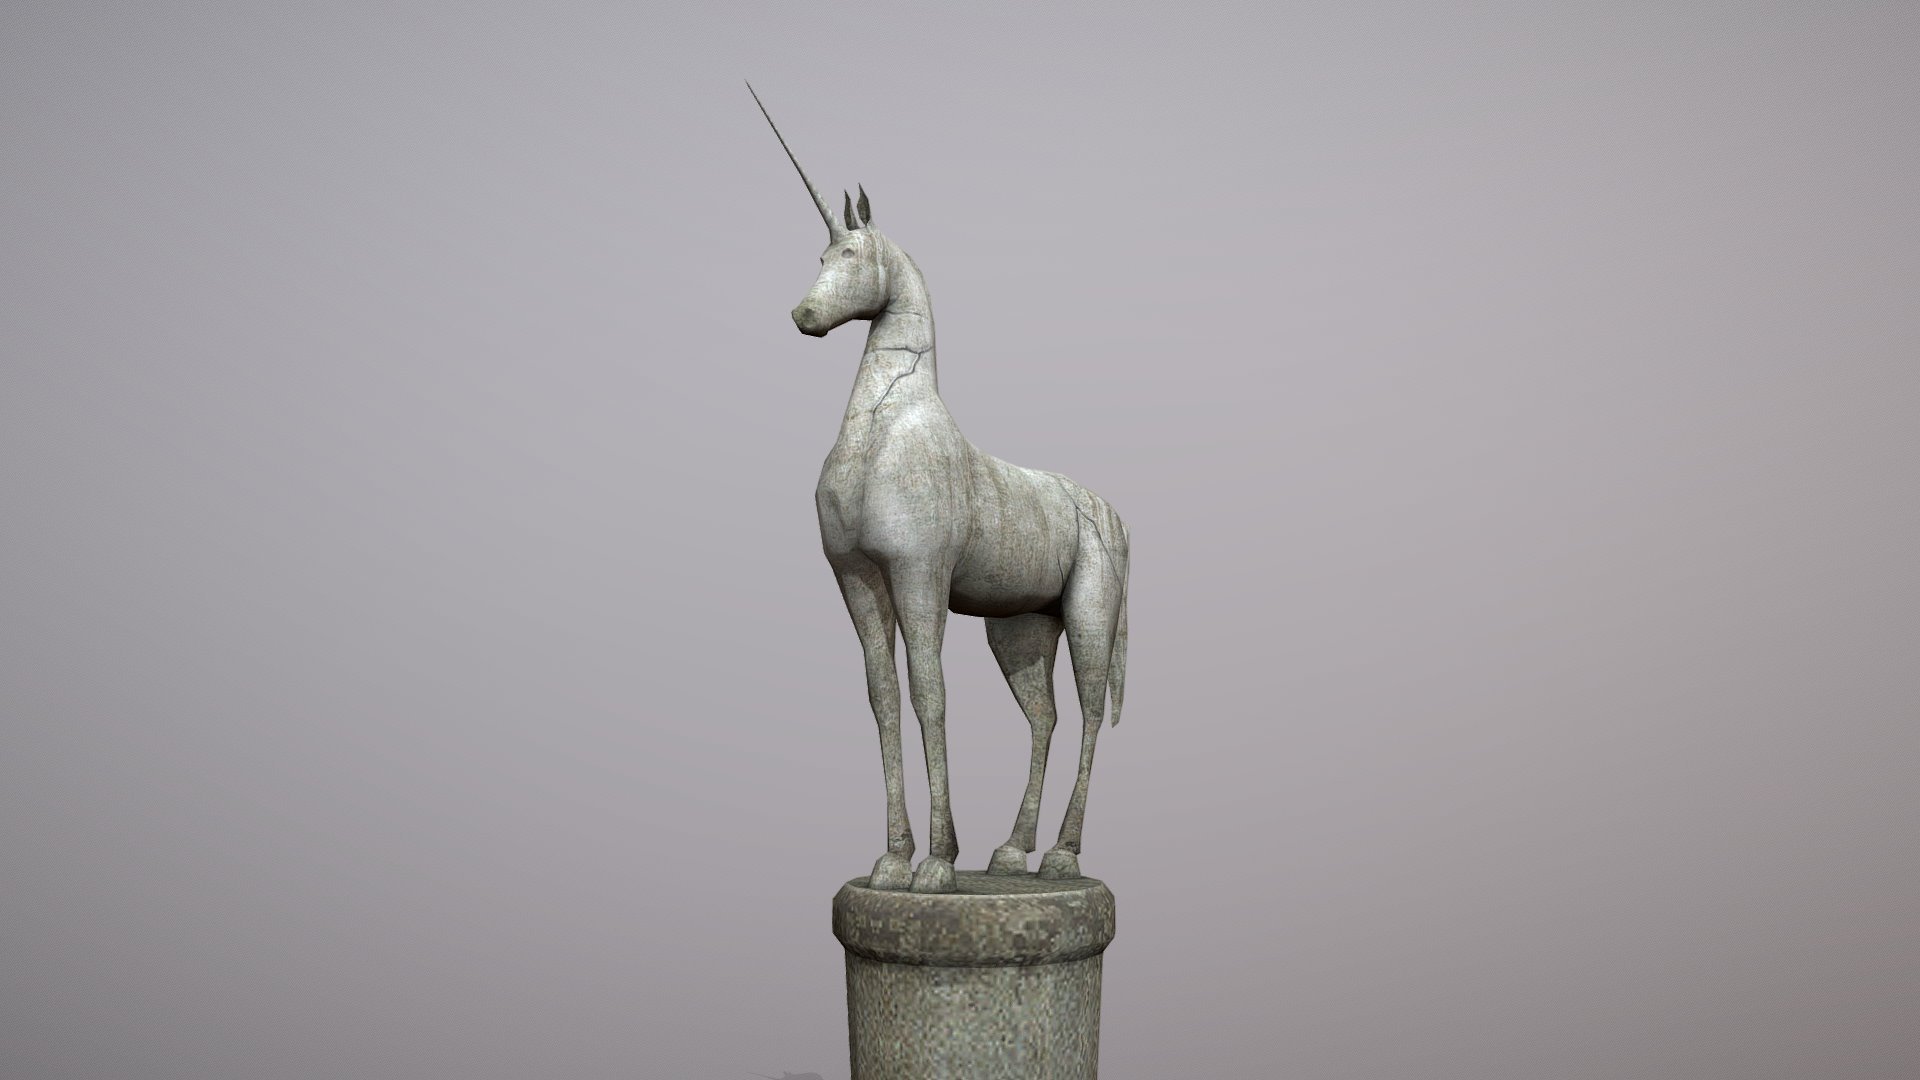 LOD0 - (triangles 1710) / (points 874)

Low-poly 3D model Unicorn Statue for game




Textures  diffuse size 512x512        

If you have questions about my models or need any kind of help, feel free to contact me and i'll do my best to help you 3d model